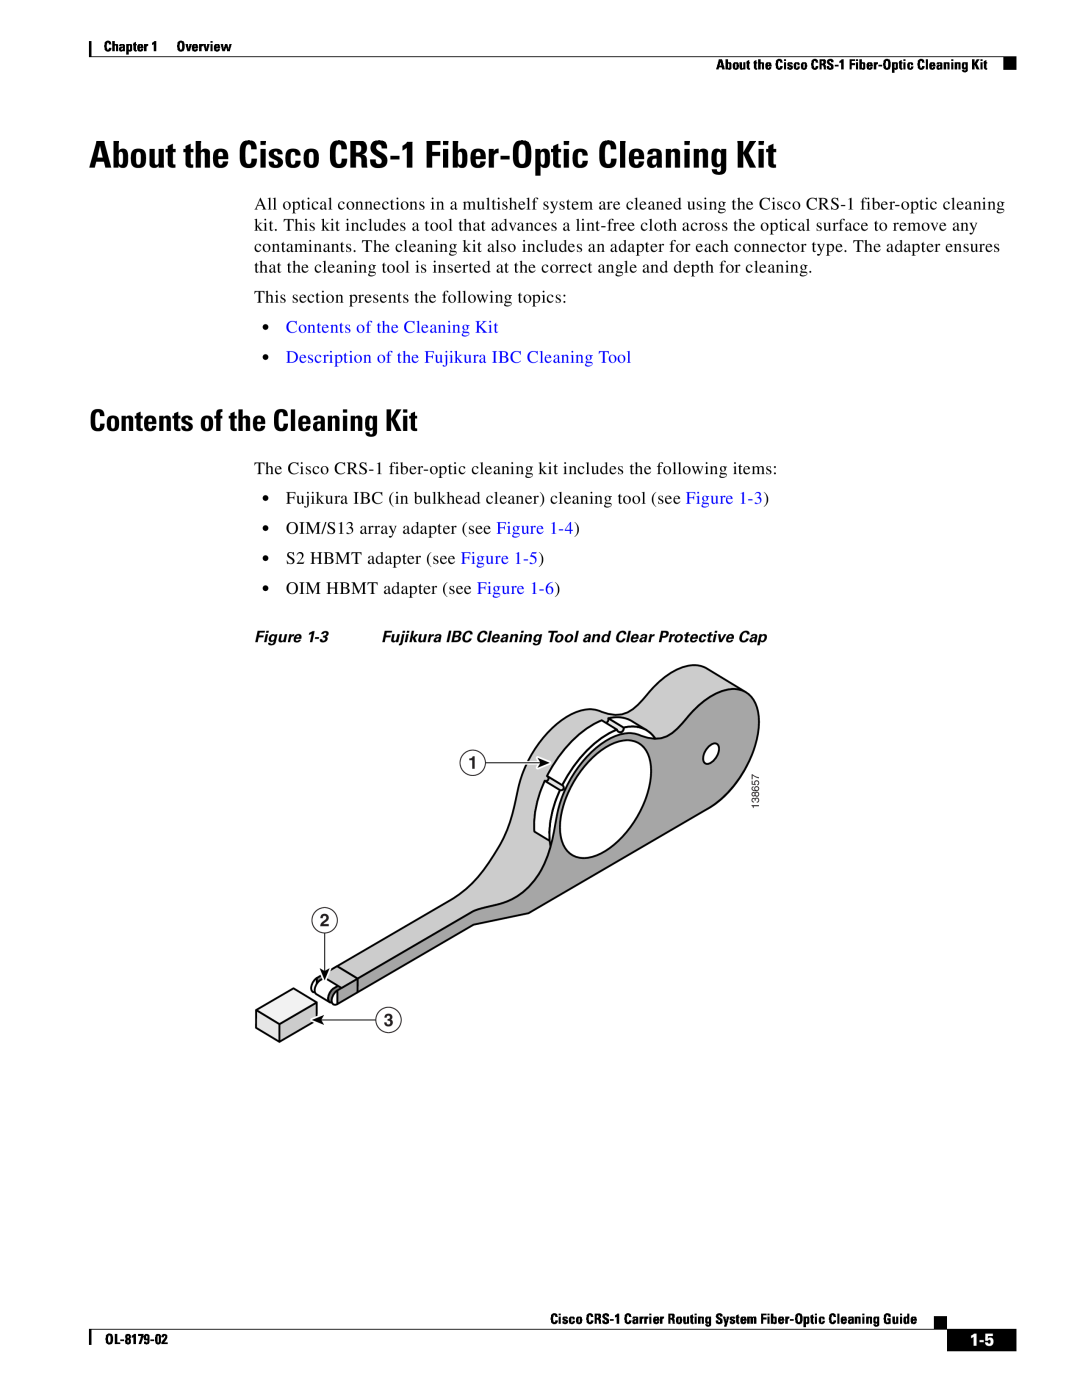 Cisco Systems manual About the Cisco CRS-1 Fiber-OpticCleaning Kit, Contents of the Cleaning Kit 